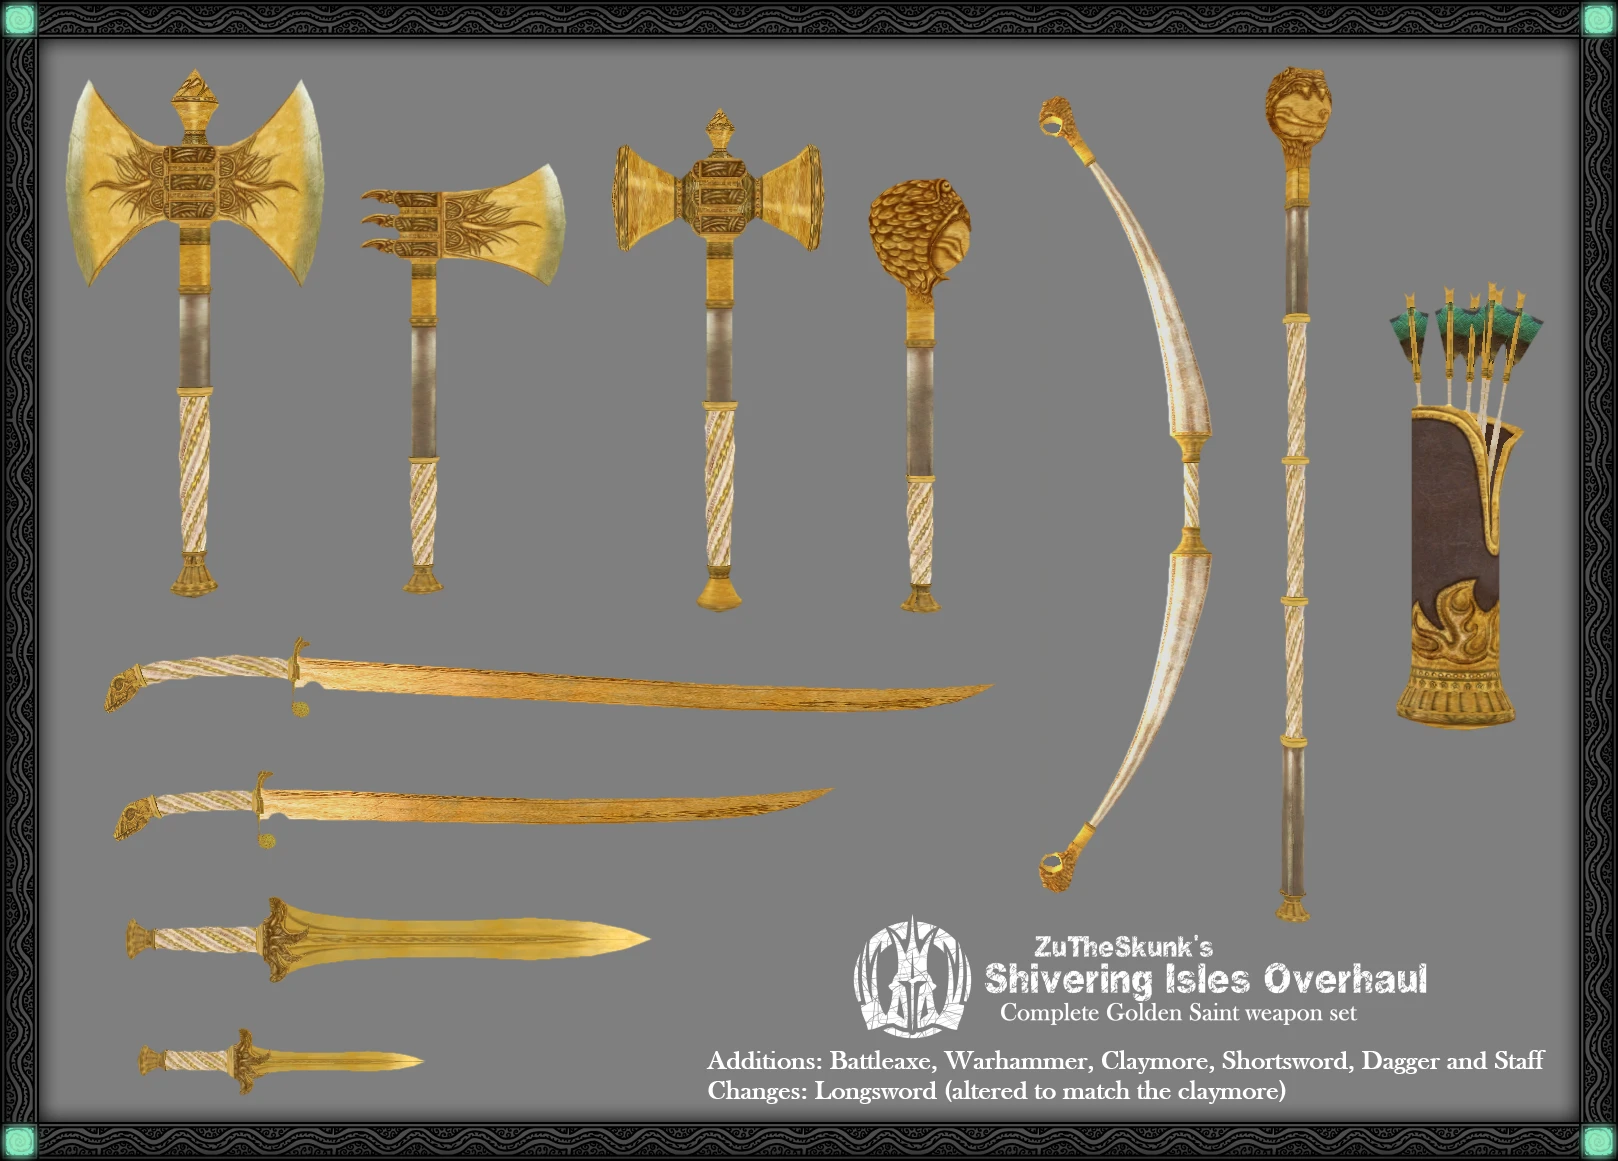 oblivion shivering isles weapons